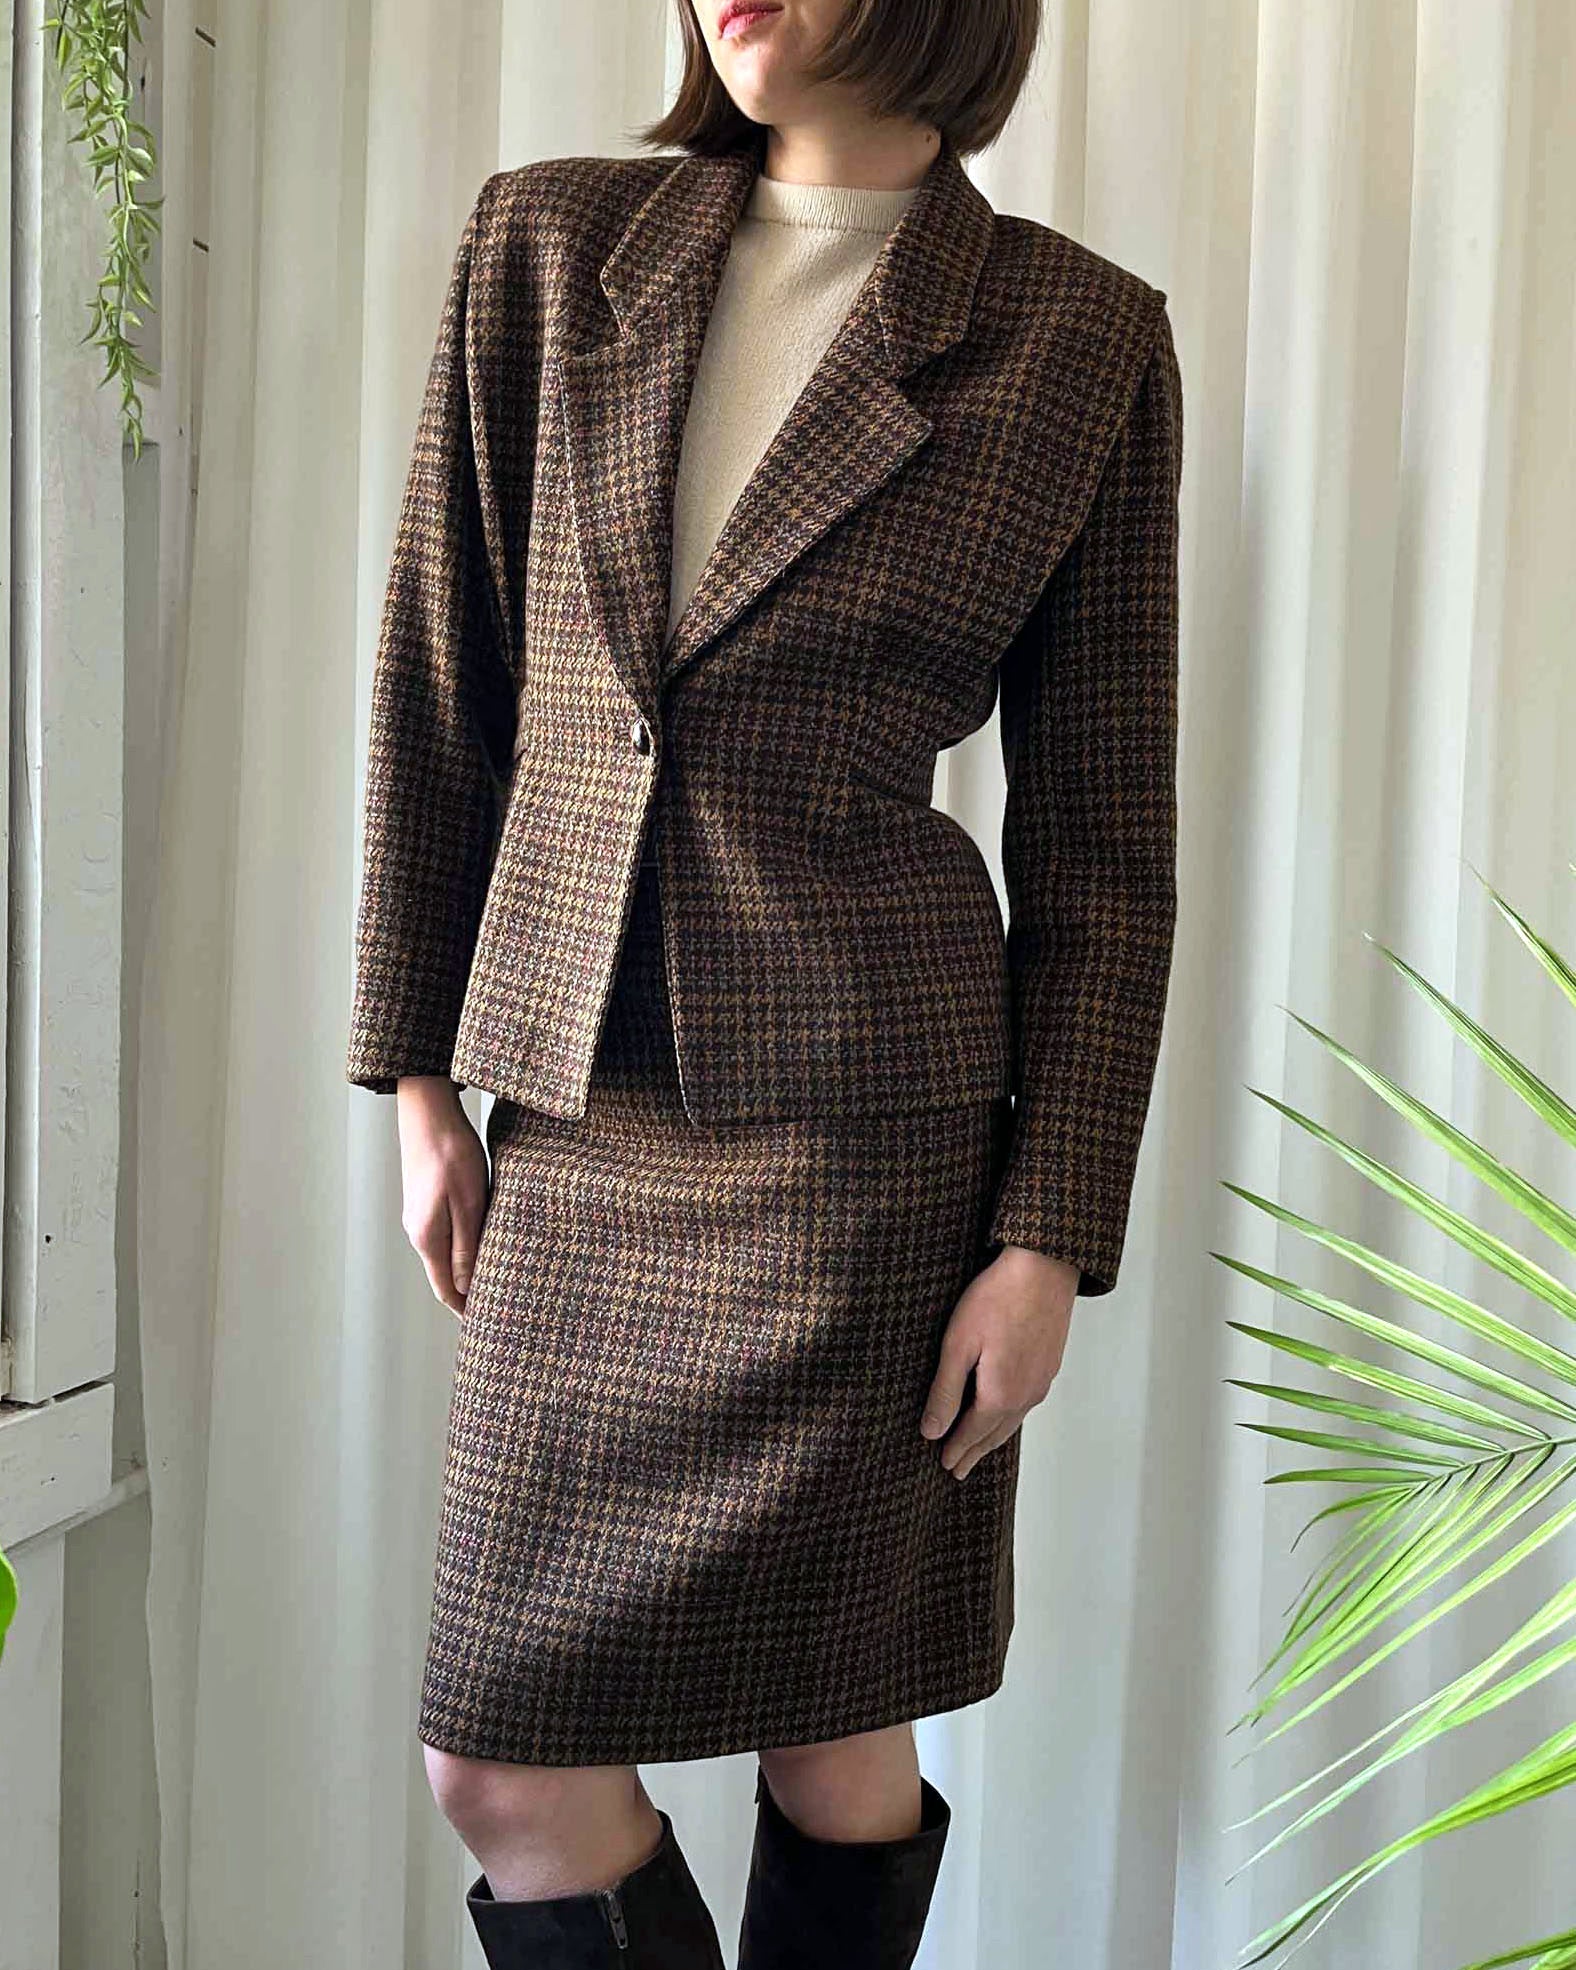 70s Houndstooth Wool Pant Suit